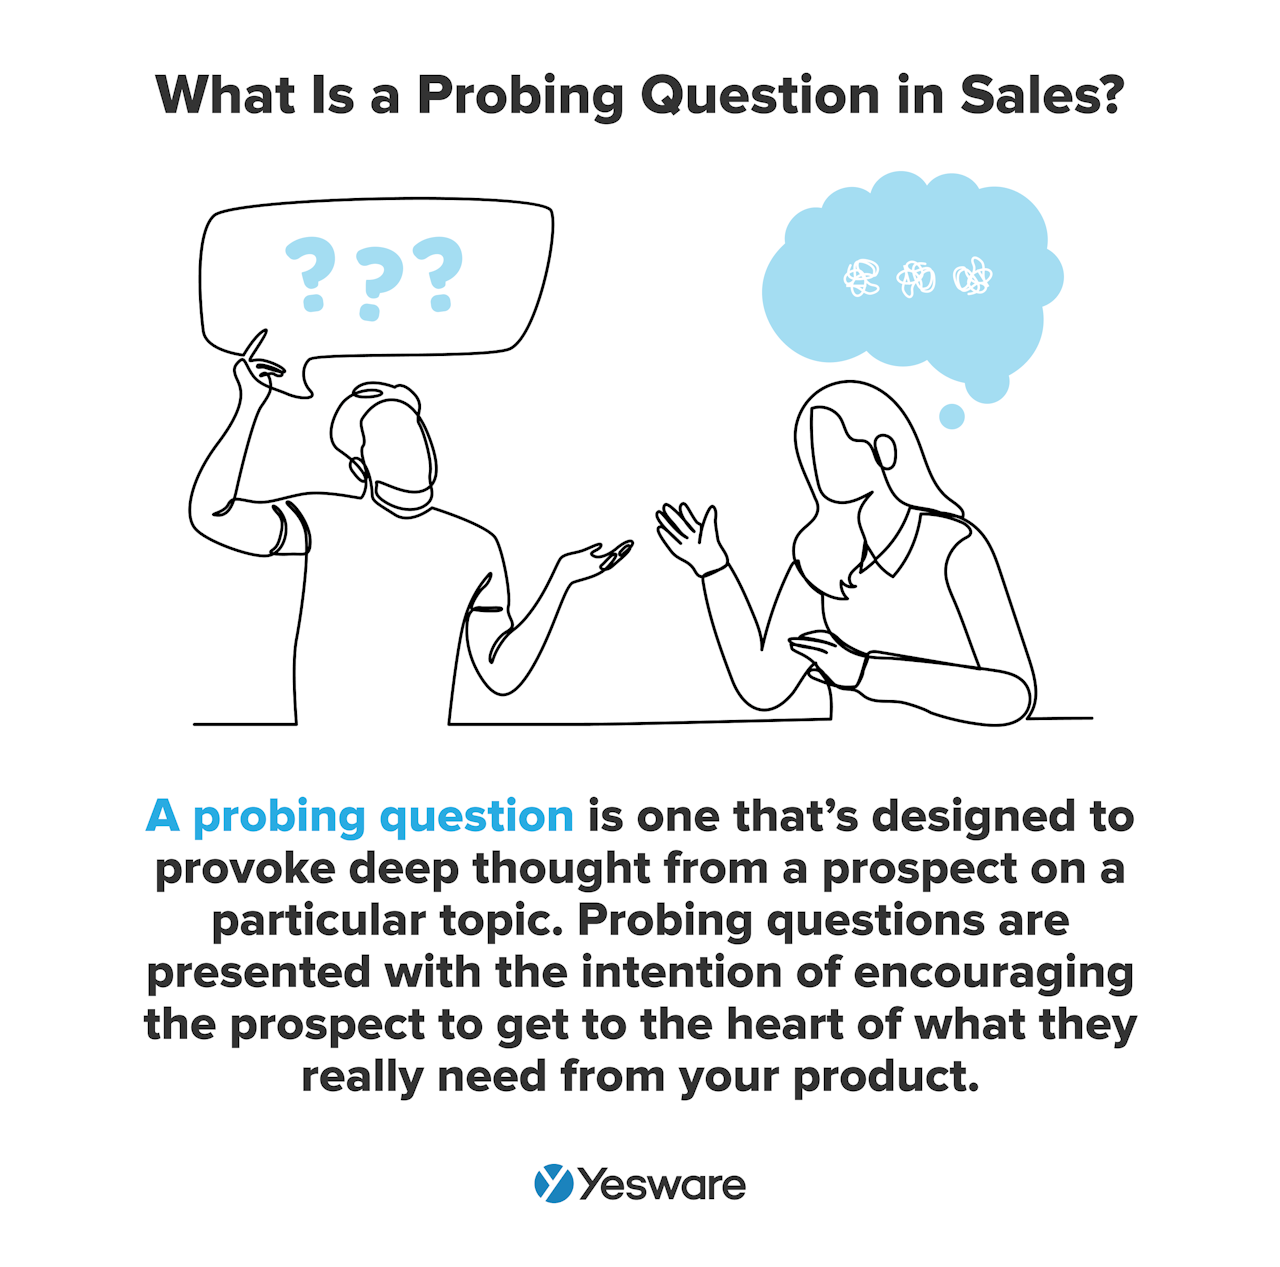 What is a probing question in sales?